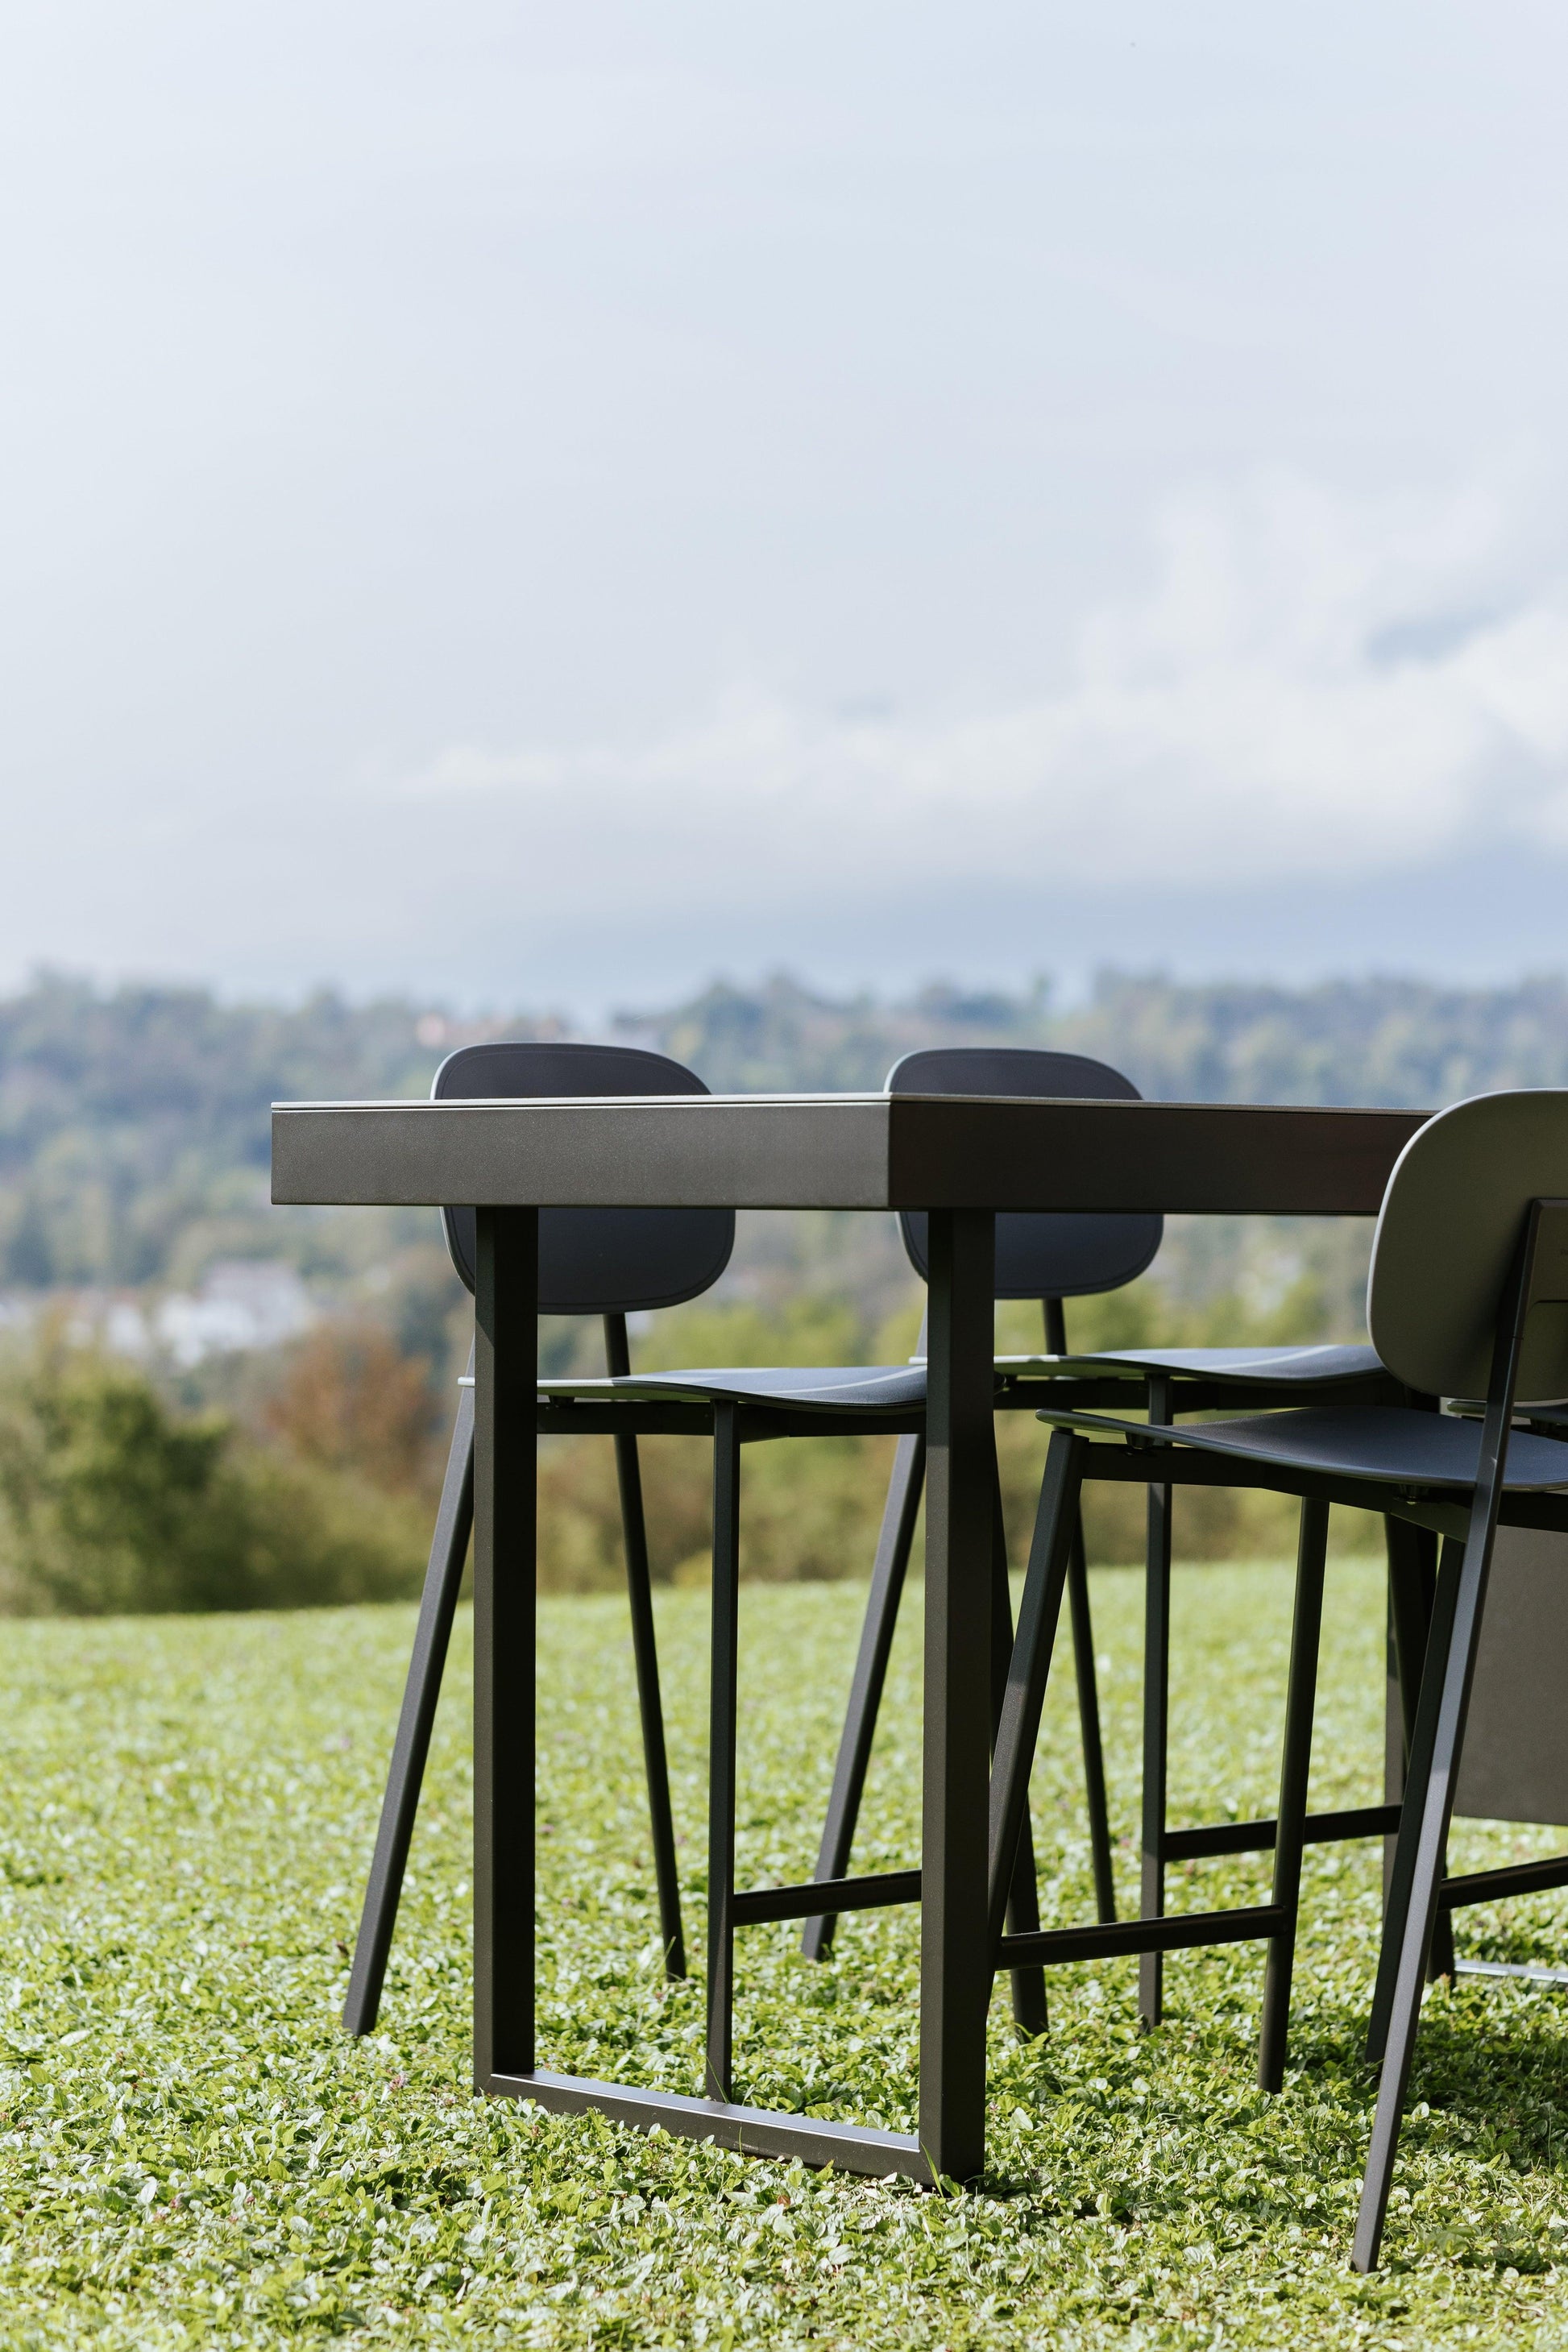 Fògher Agher Table and Chairs - Garden House Design